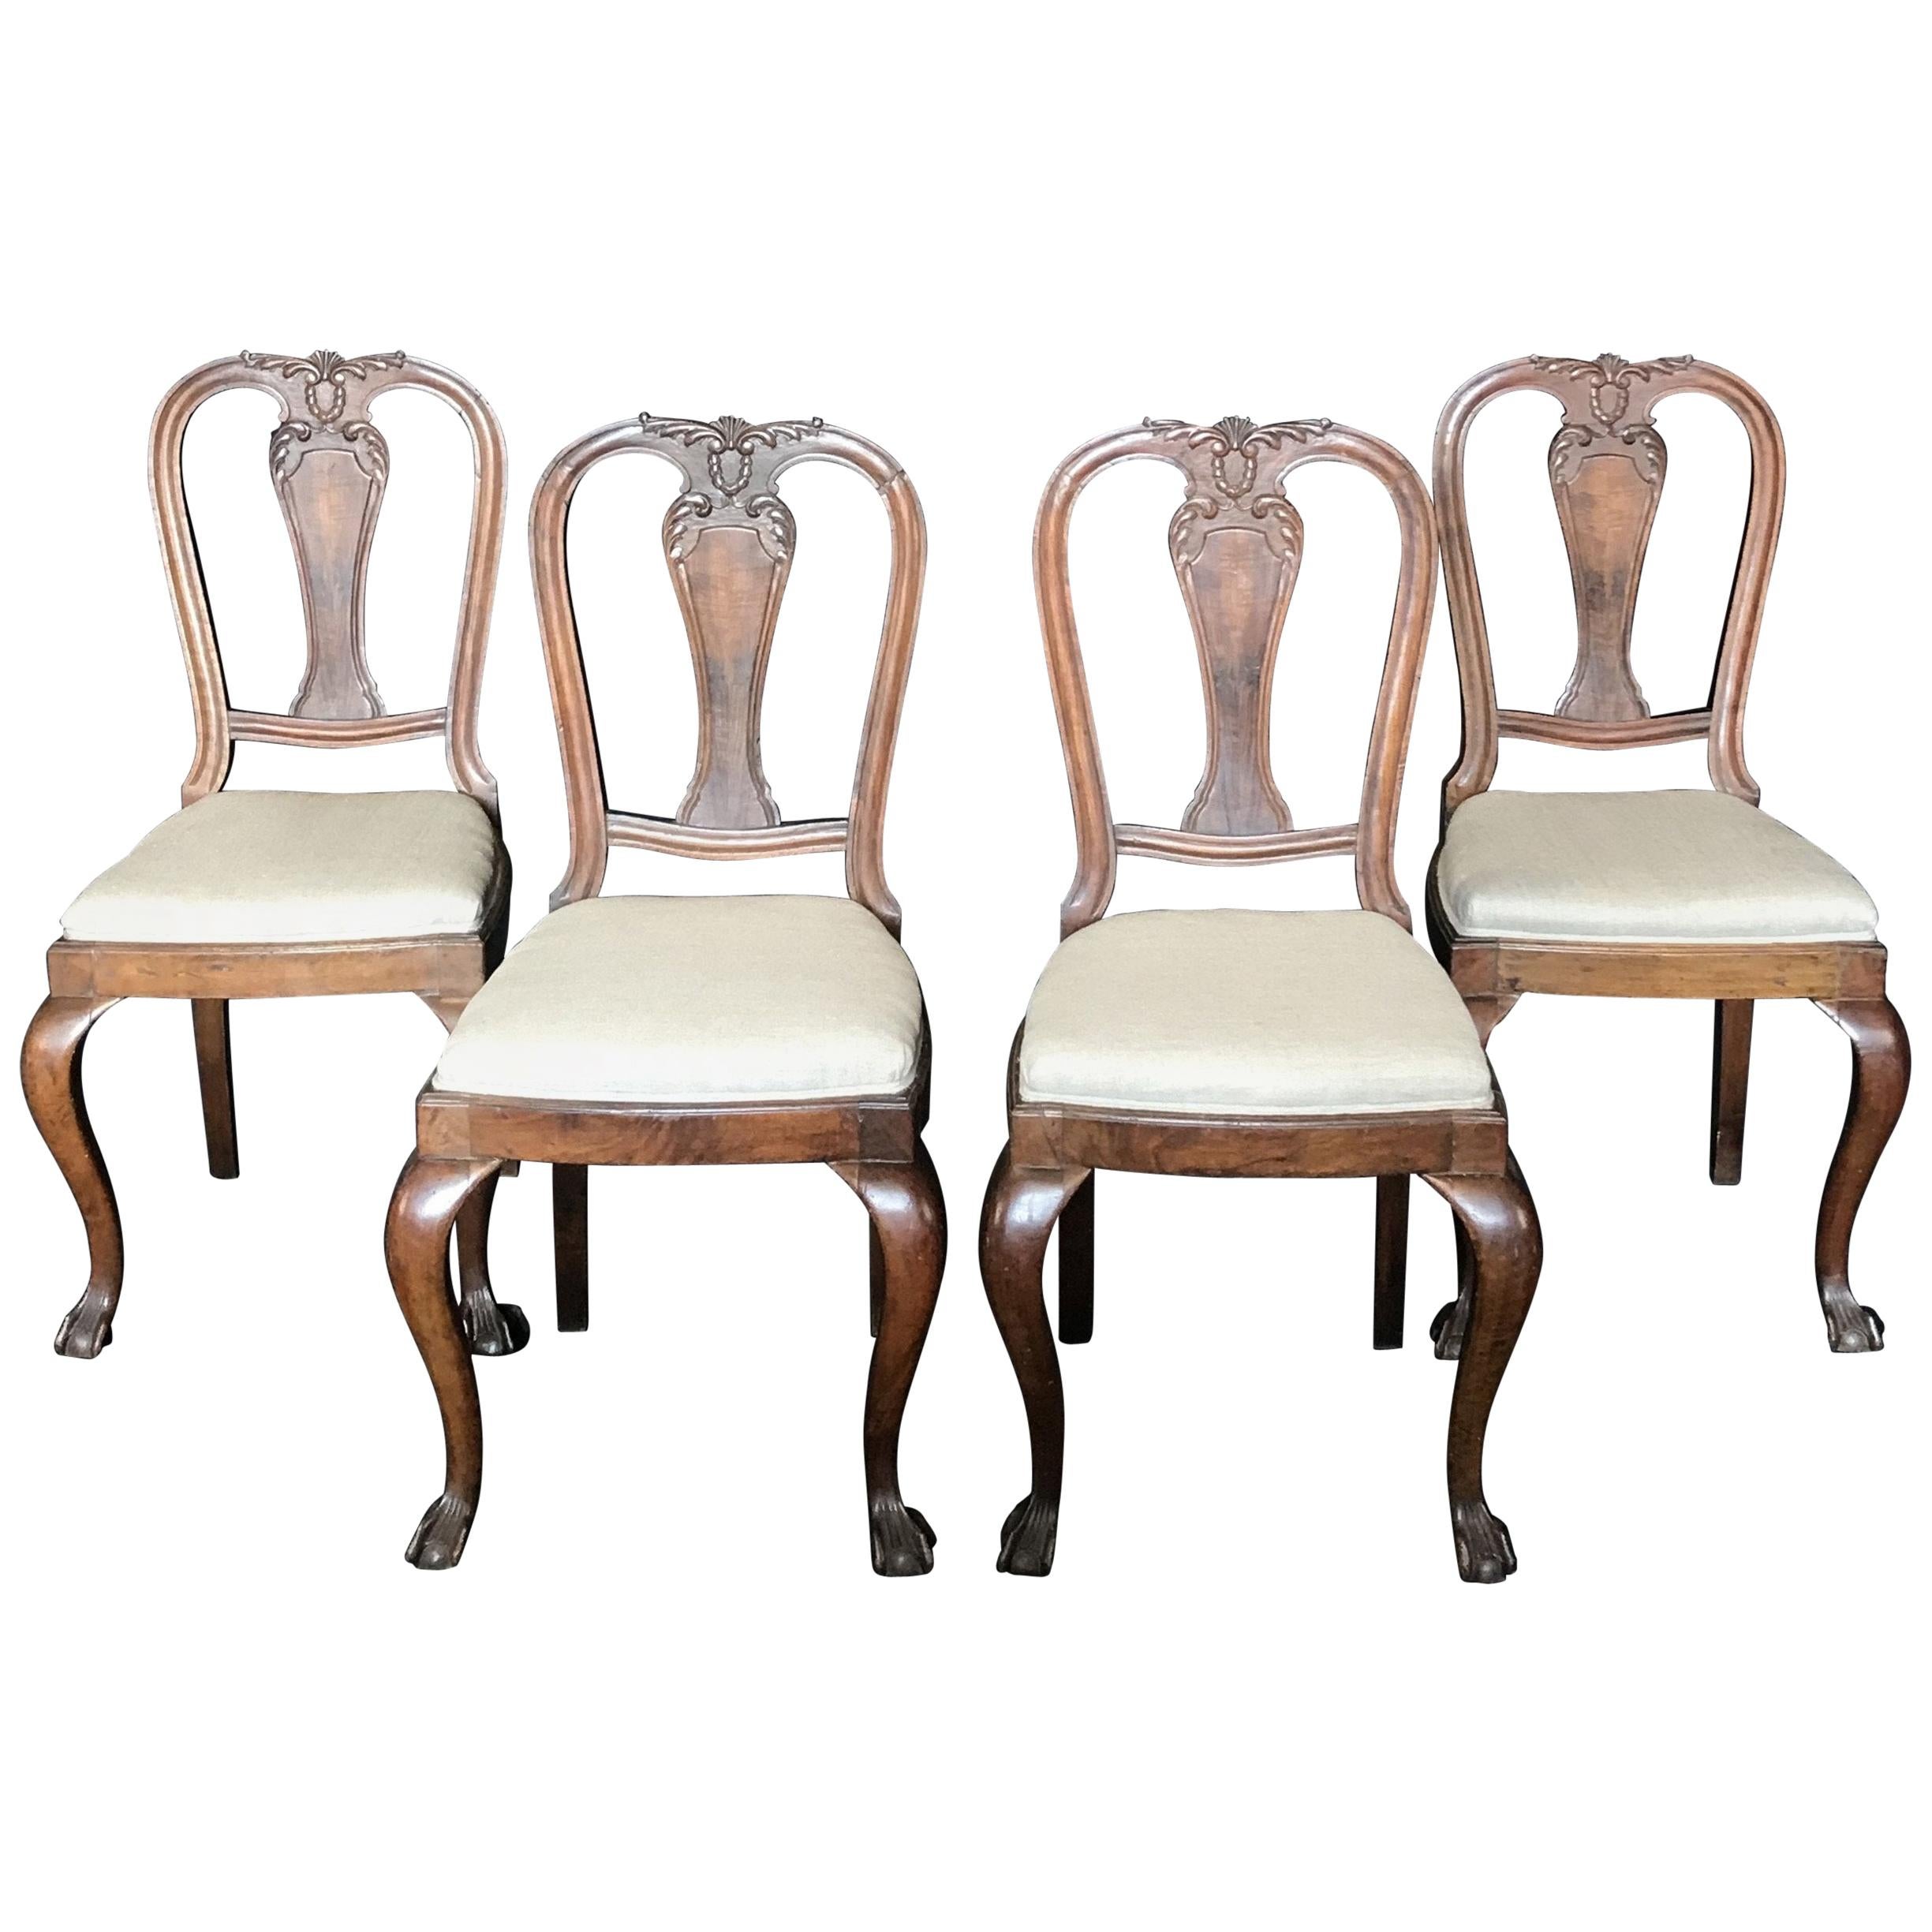 Lovely Set of Four Carved Walnut English Side Dining Chairs